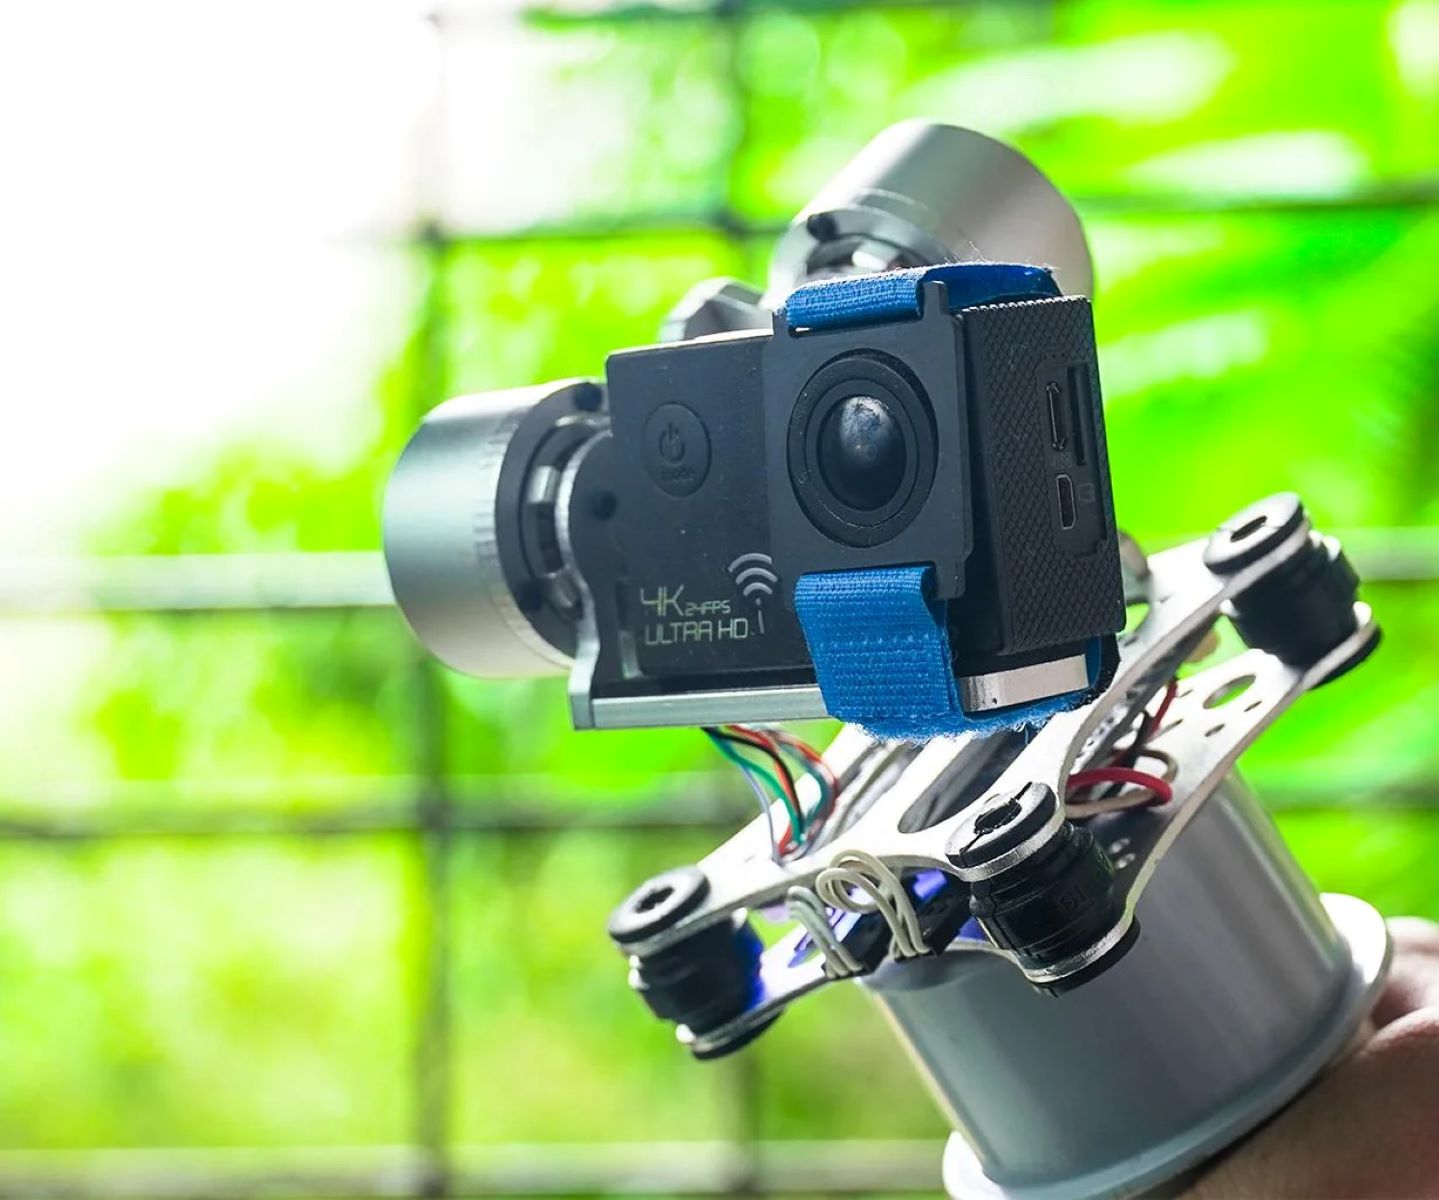 How to Build a Stabilization Gimbal for an Action Camera | Robots.net